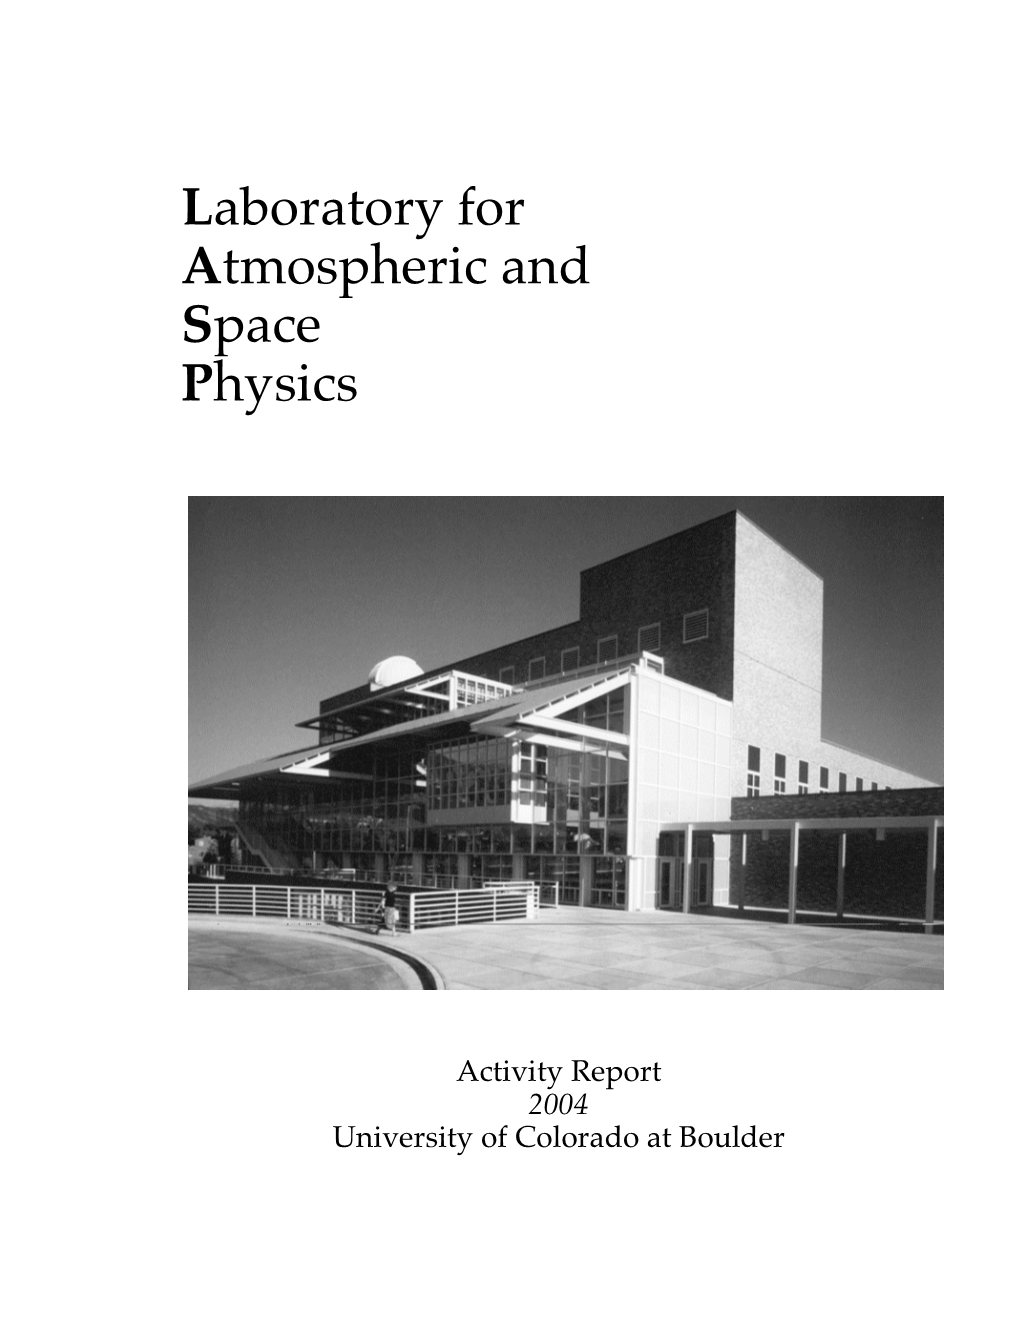 Laboratory for Atmospheric and Space Physics